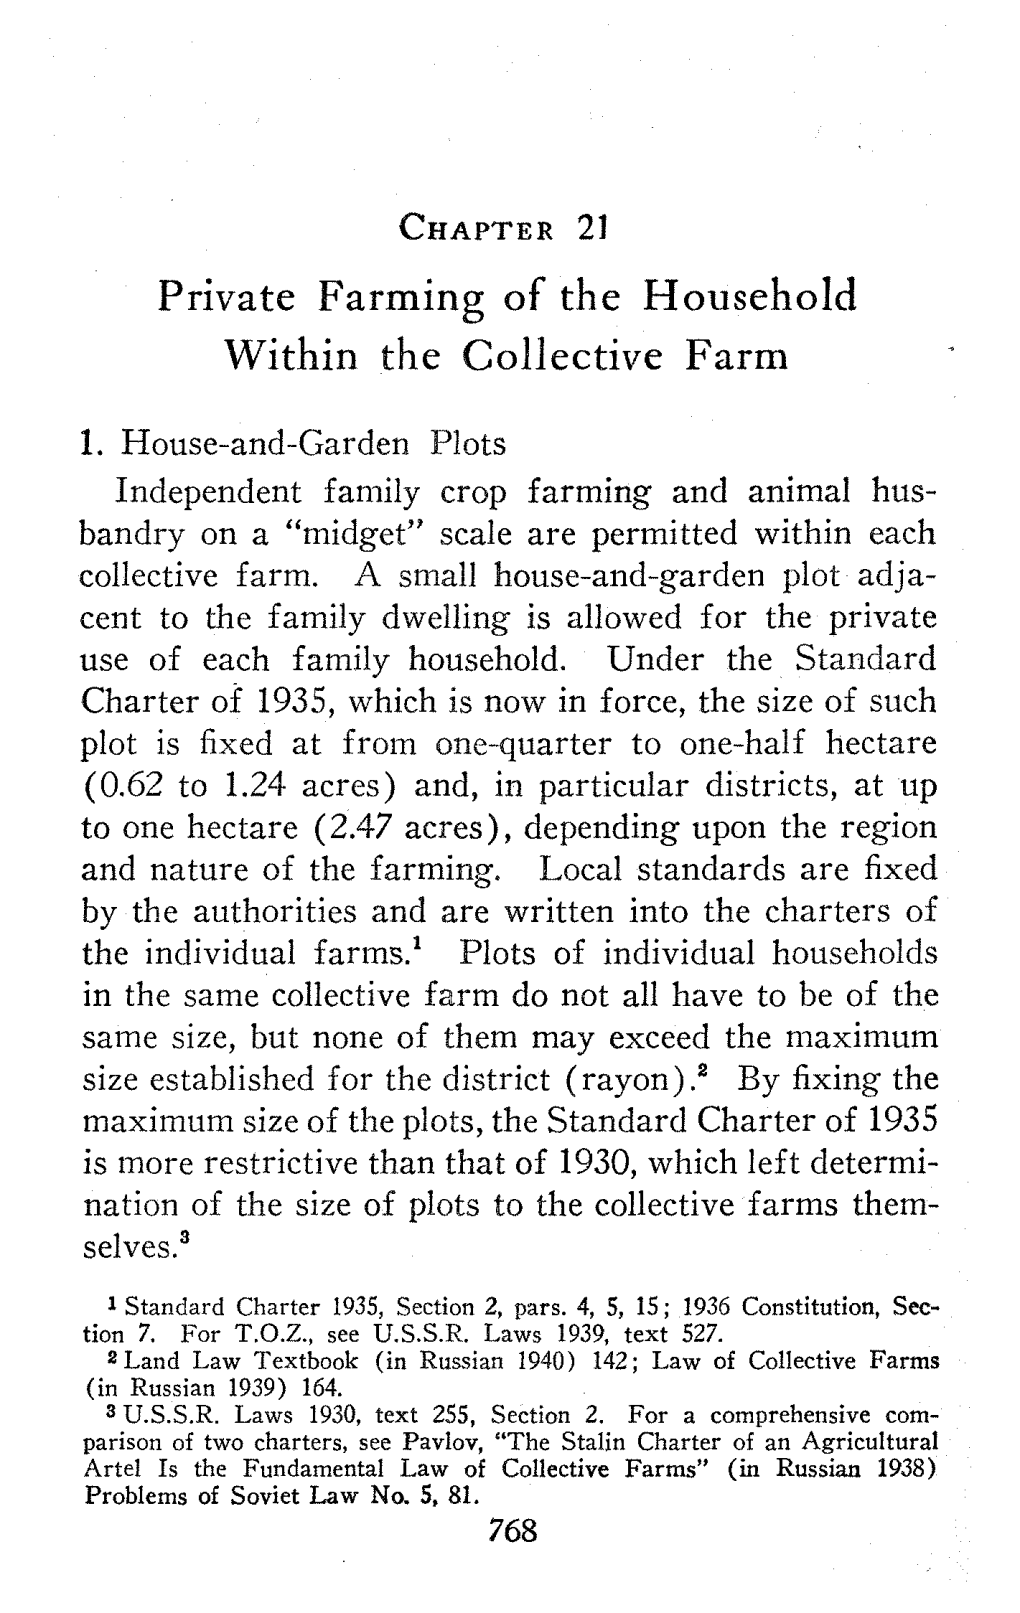 Private Farming of the Household Within the Collective Farm